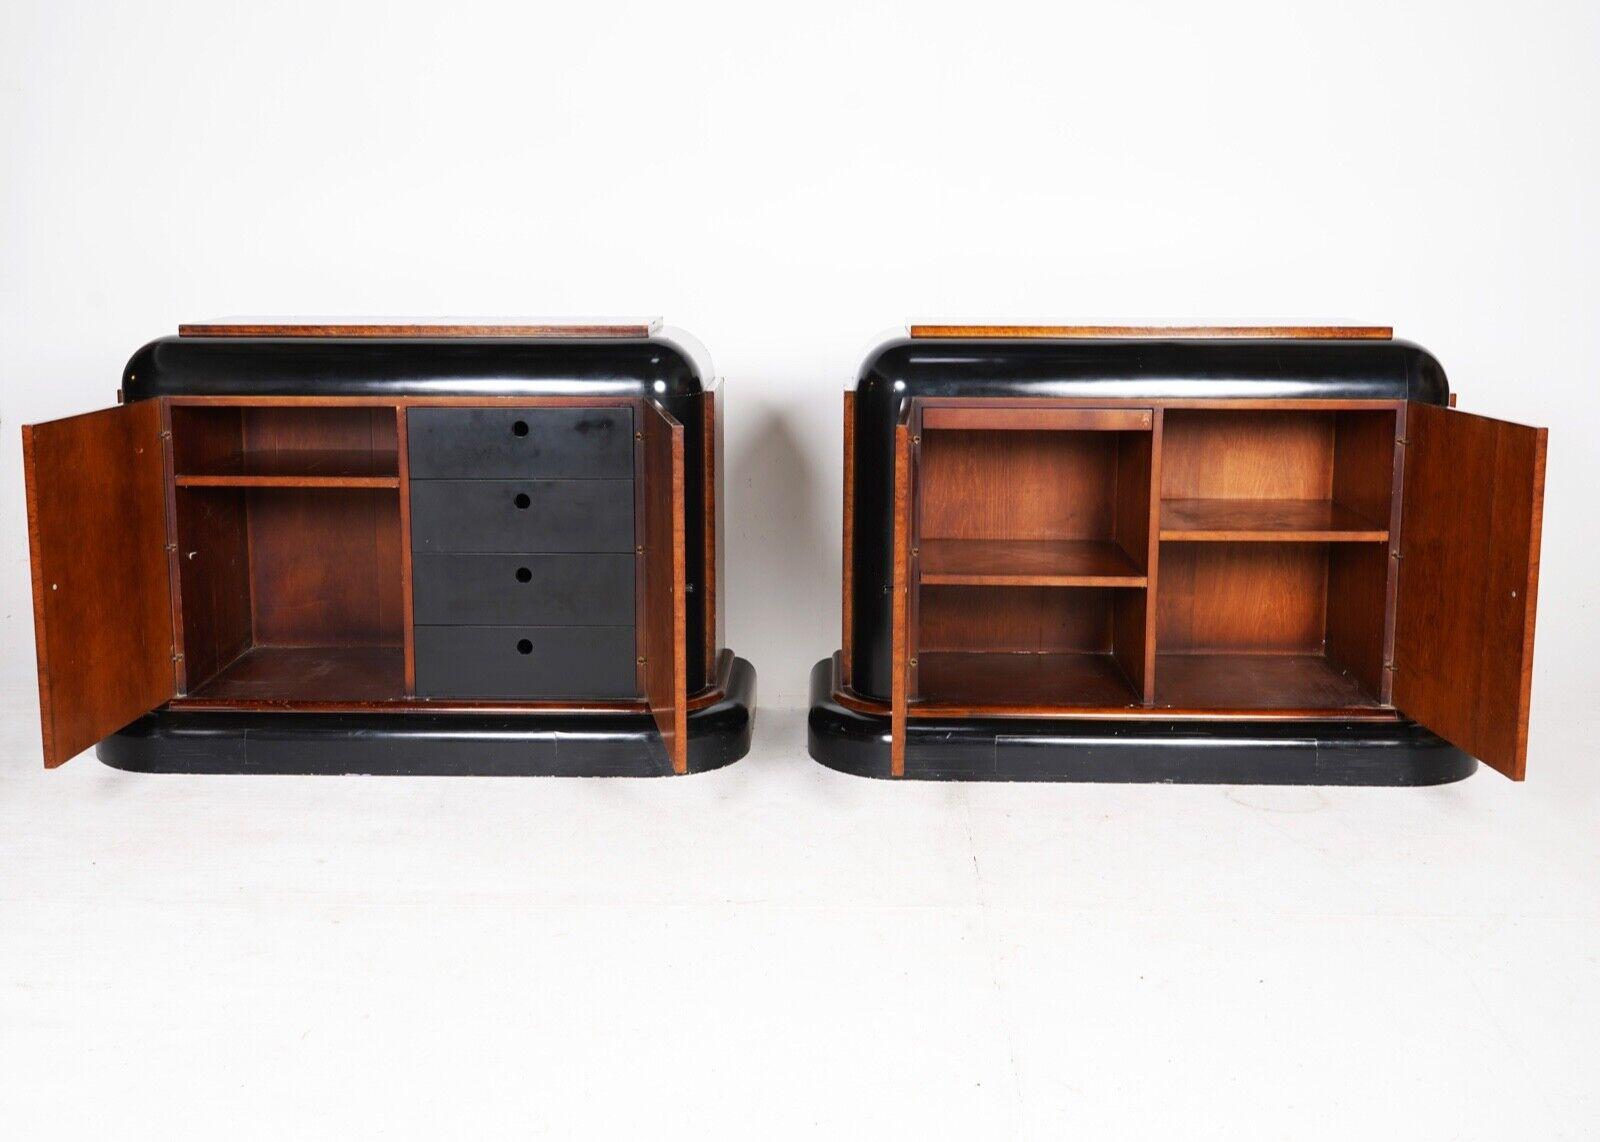 British Pair Of Art Deco Style Sideboard Cabinets